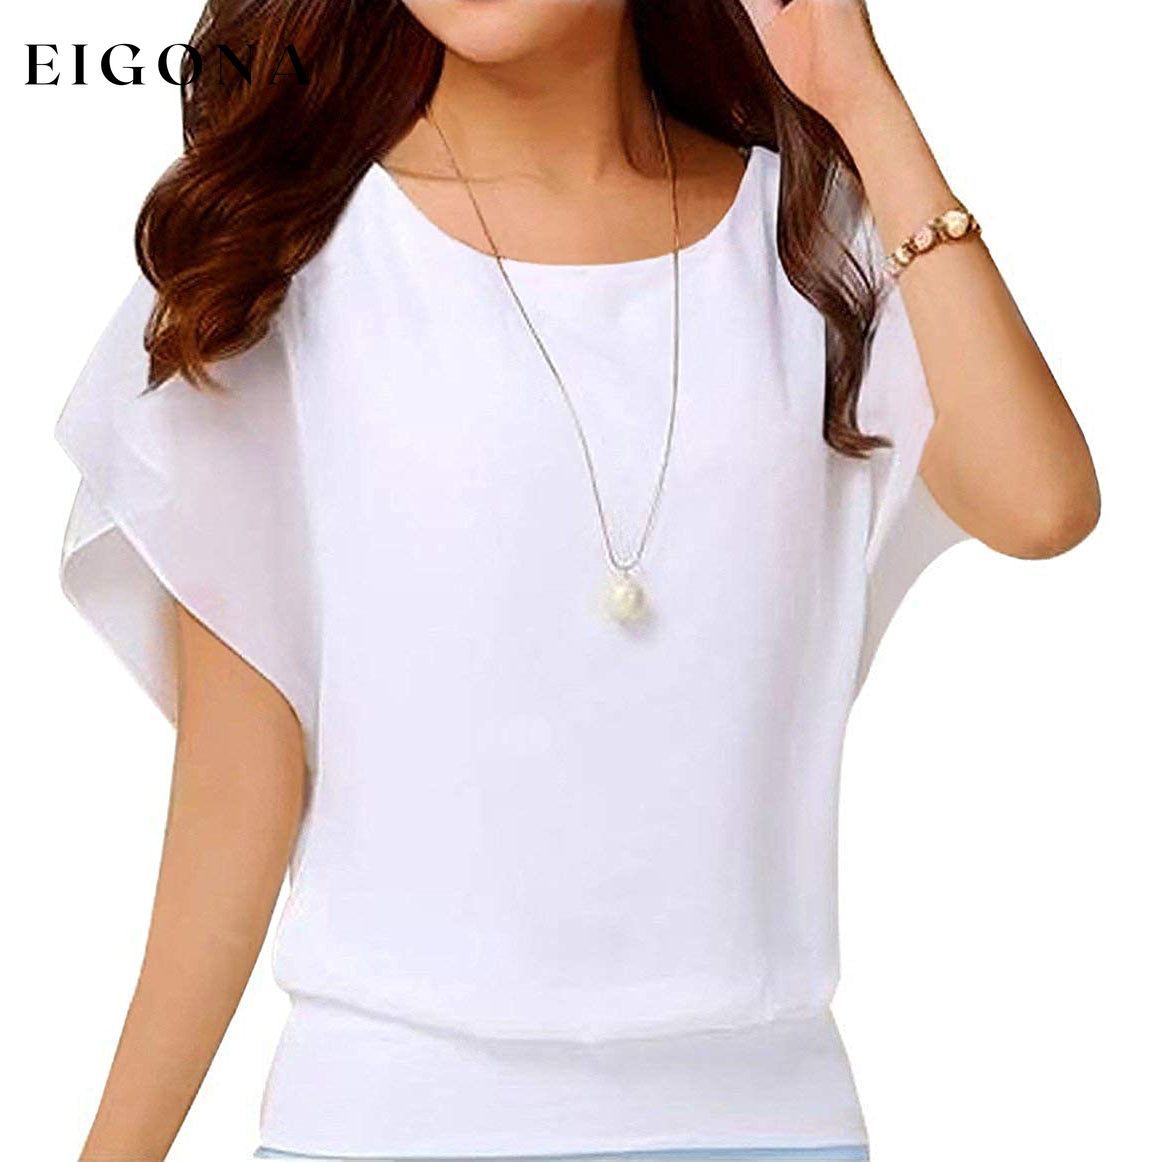 Women's Loose Casual Short Sleeve Chiffon Top T-Shirt Blouse White __stock:200 clothes refund_fee:800 tops